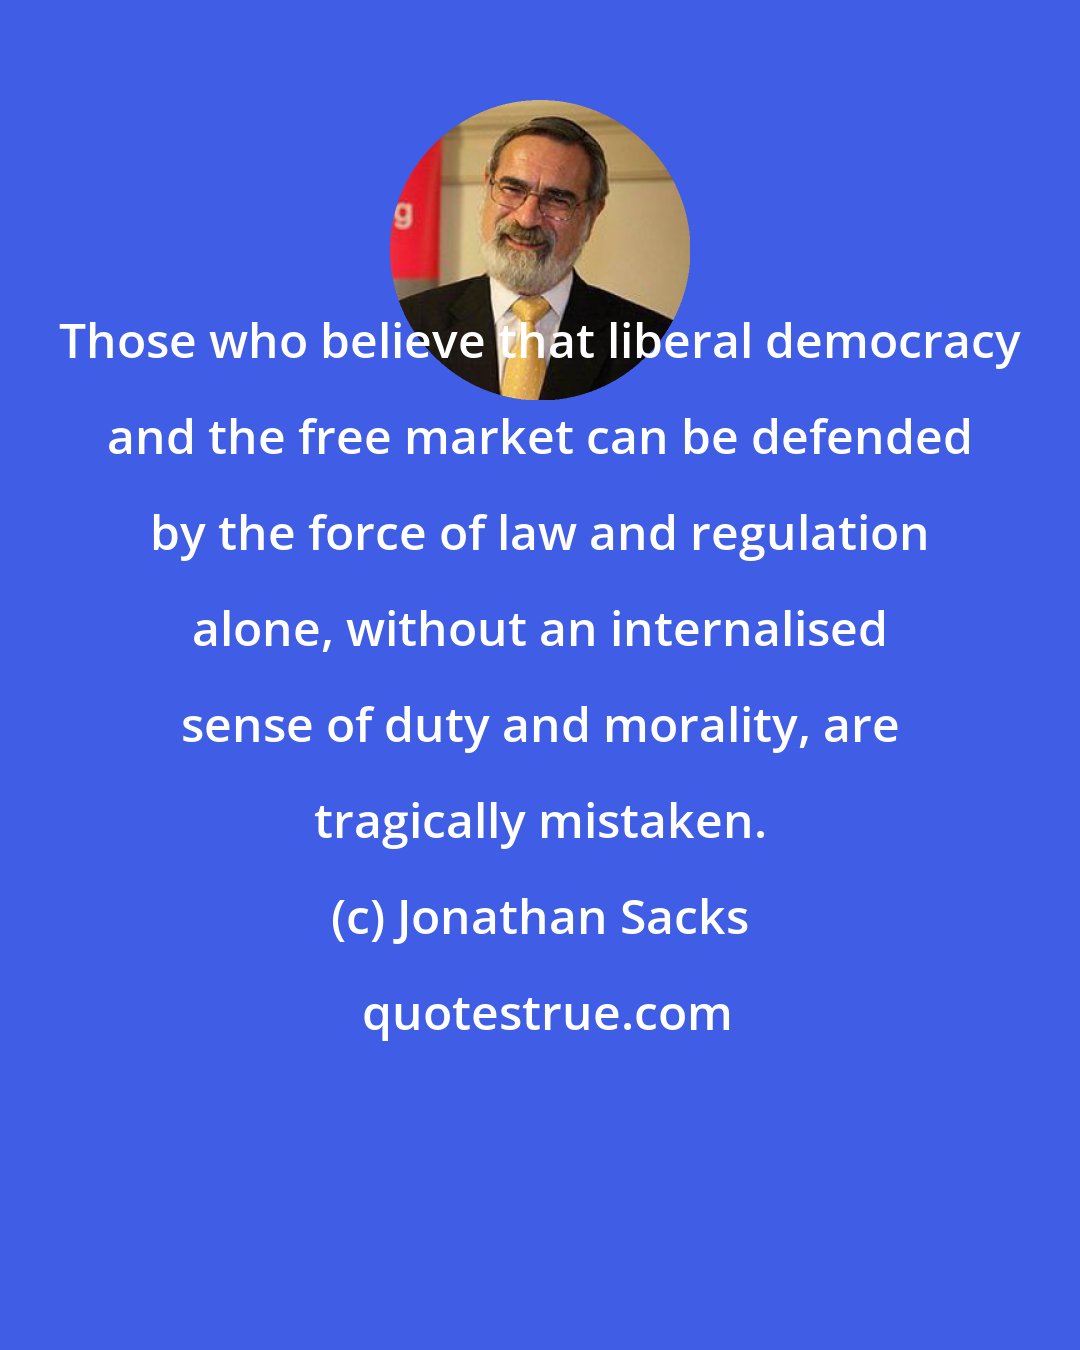 Jonathan Sacks: Those who believe that liberal democracy and the free market can be defended by the force of law and regulation alone, without an internalised sense of duty and morality, are tragically mistaken.